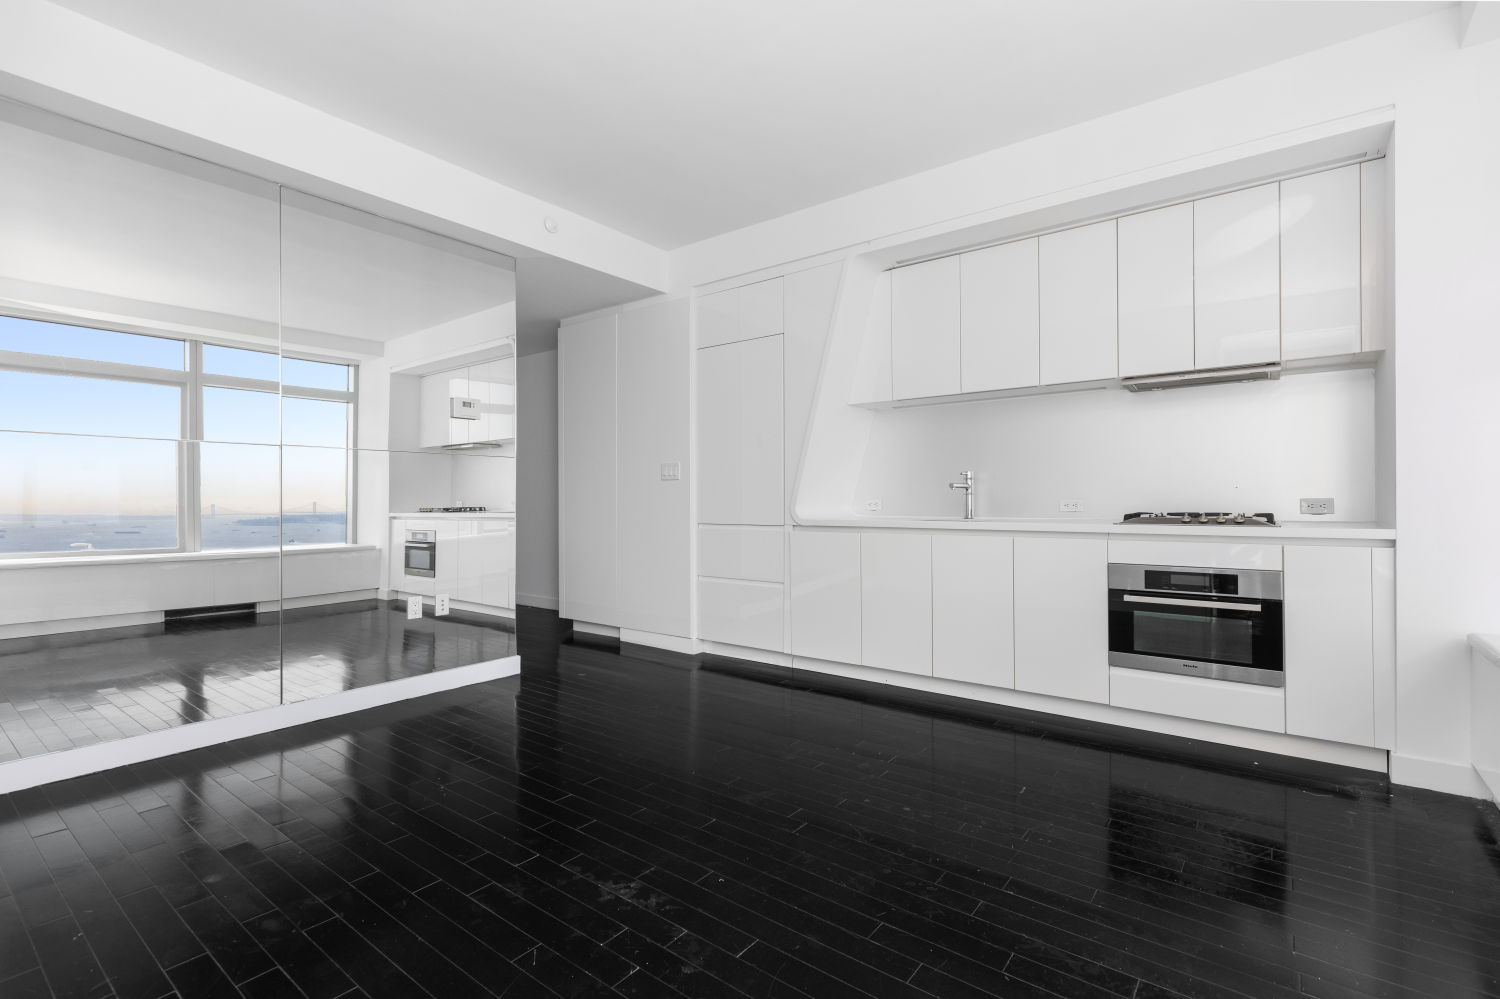 123 Washington Street Ph50h, Financial District, Downtown, NYC - 1 Bedrooms  
1 Bathrooms  
3 Rooms - 